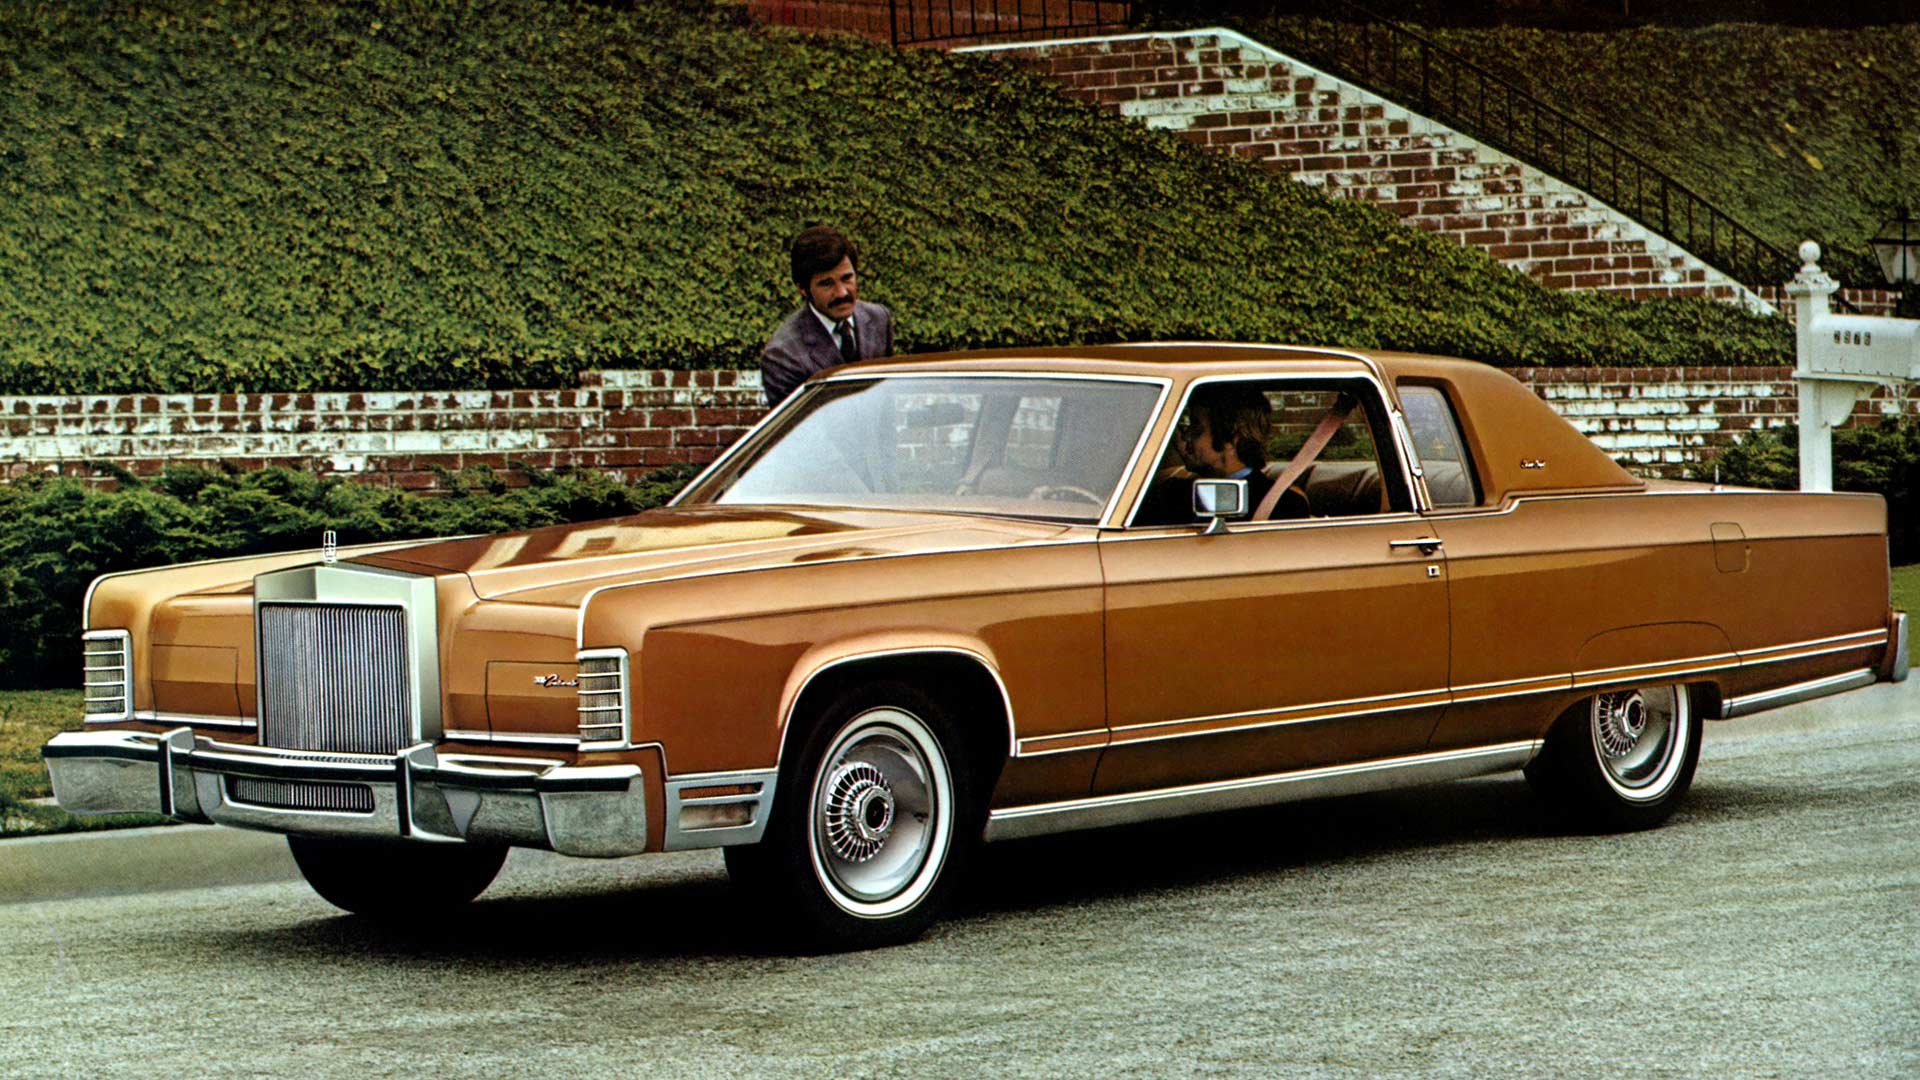 <p>If you thought the Mark IV Continental was a whale-sized Lincoln, then we’re going to need a bigger boat for the Continental Town Coupe. Offered in both two- and four-door designs, the fifth-generation of the Continental was vast when first launched in 1970. The introduction of federal bumpers added extra length in 1973.</p> <p>However, it was the final tweaks to the bumpers in 1977 that truly made the Continental vast. The year also saw the introduction of the special Williamsburg Edition. This included two-tone paintwork, a full-length vinyl roof, and six-way power adjustable front seats.</p>